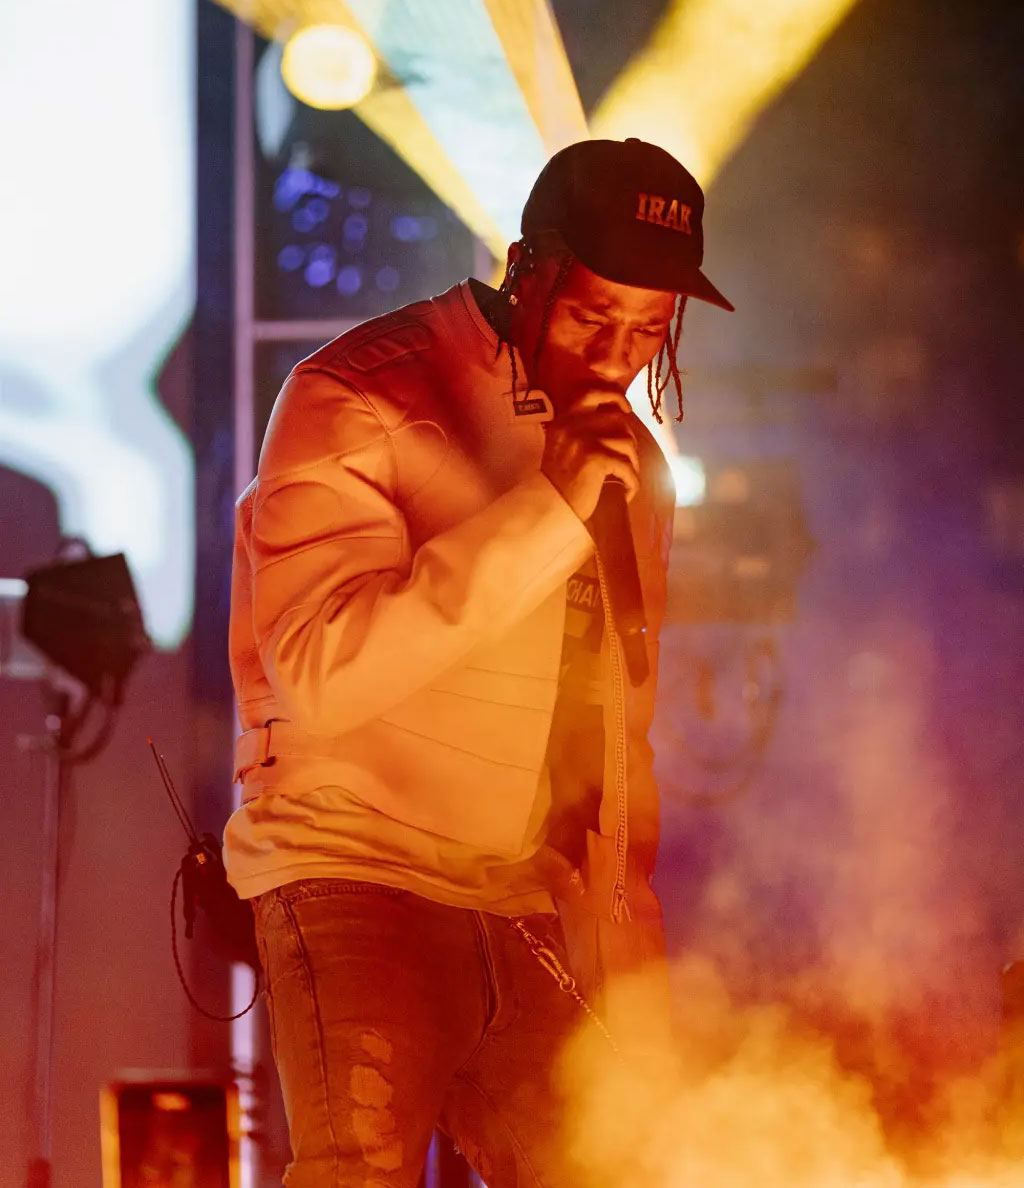 Travis Scott performing poolside at the Fontainebleau Miami Beach